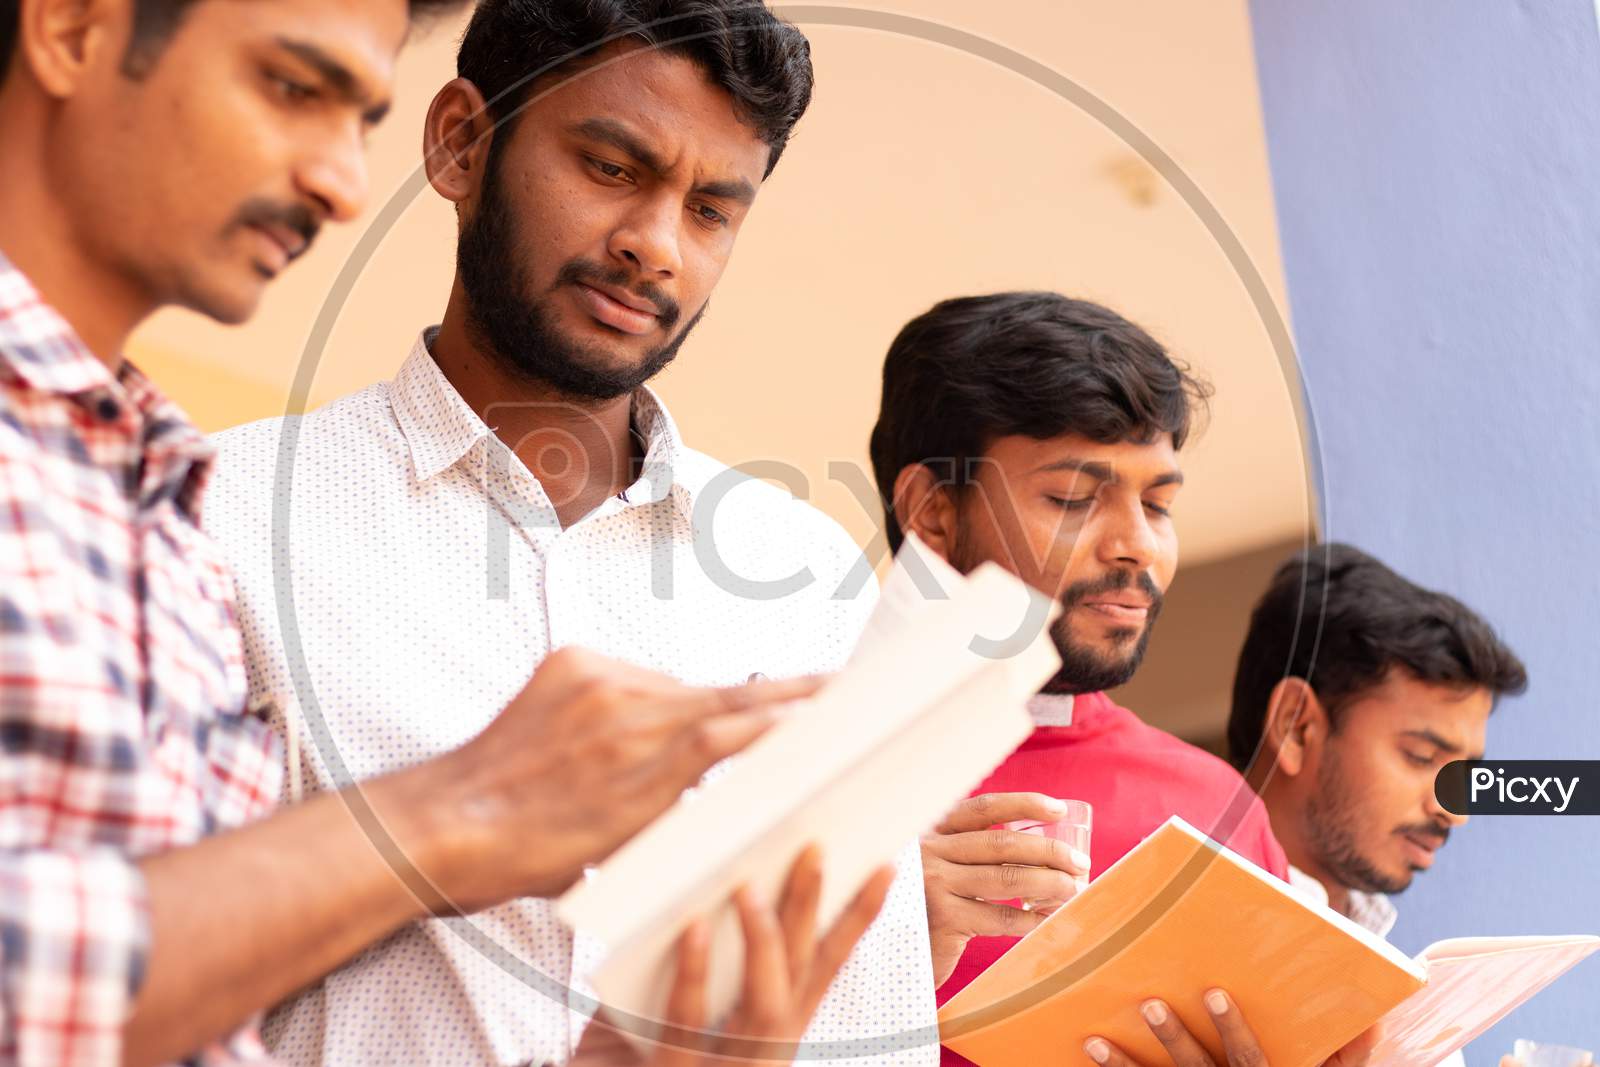 Group Of Students studying together and clearing doubts by Looking Into Books At College - Education, Learning Student, People Concept